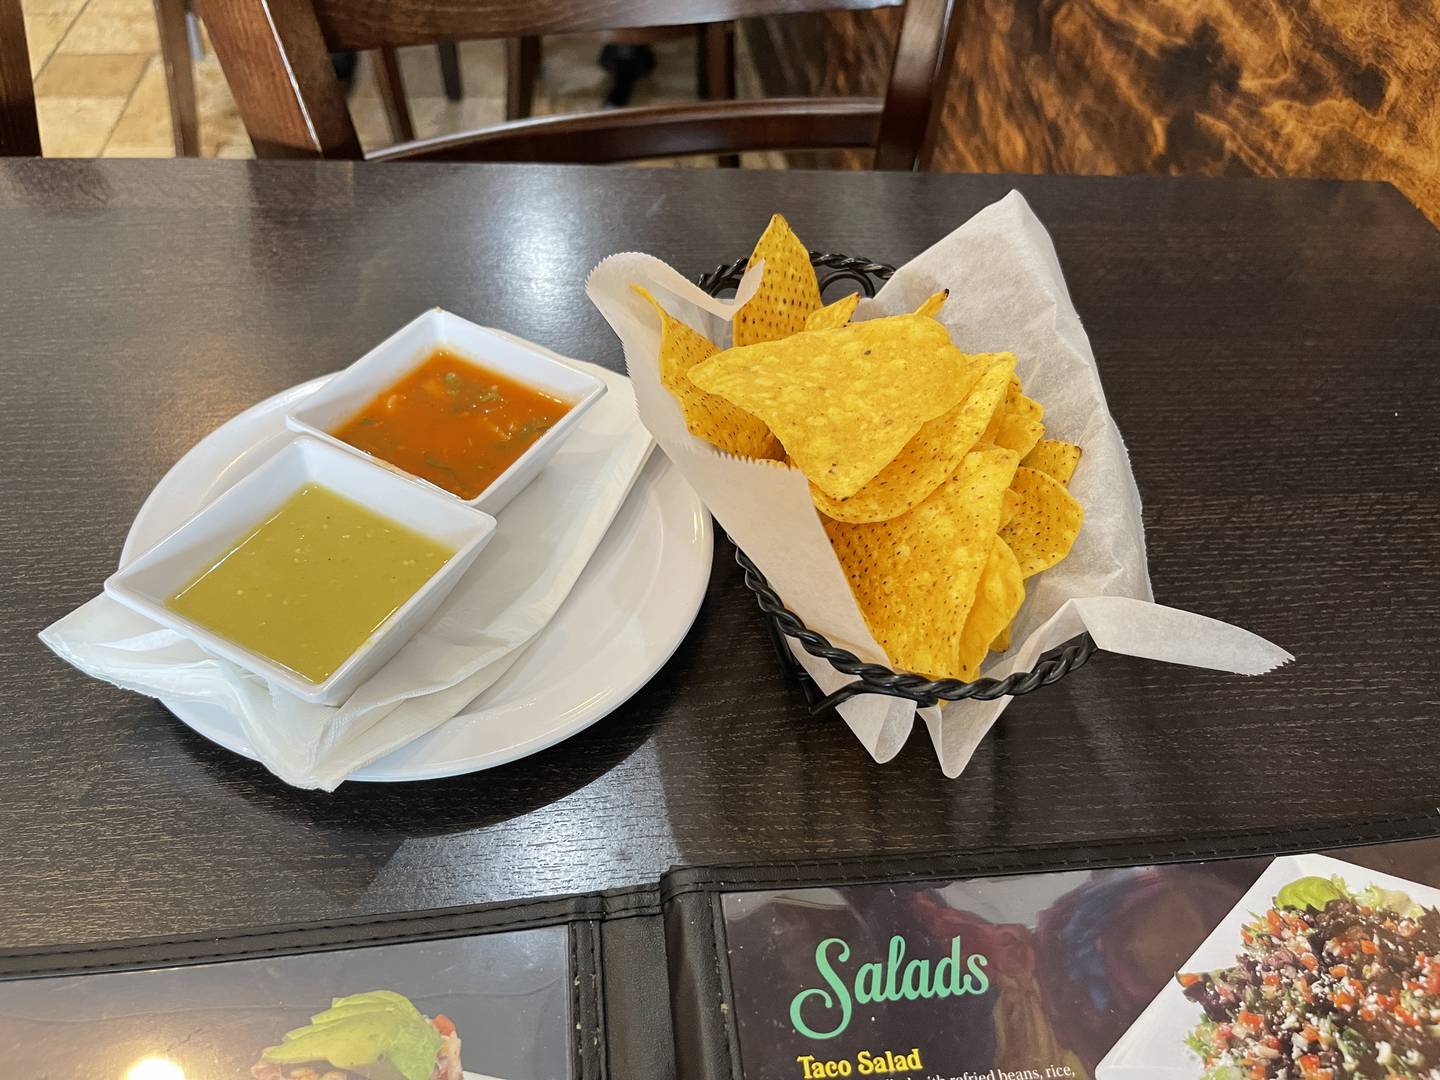 While complimentary and not too spicy, the chips and salsas offered were flavorful.